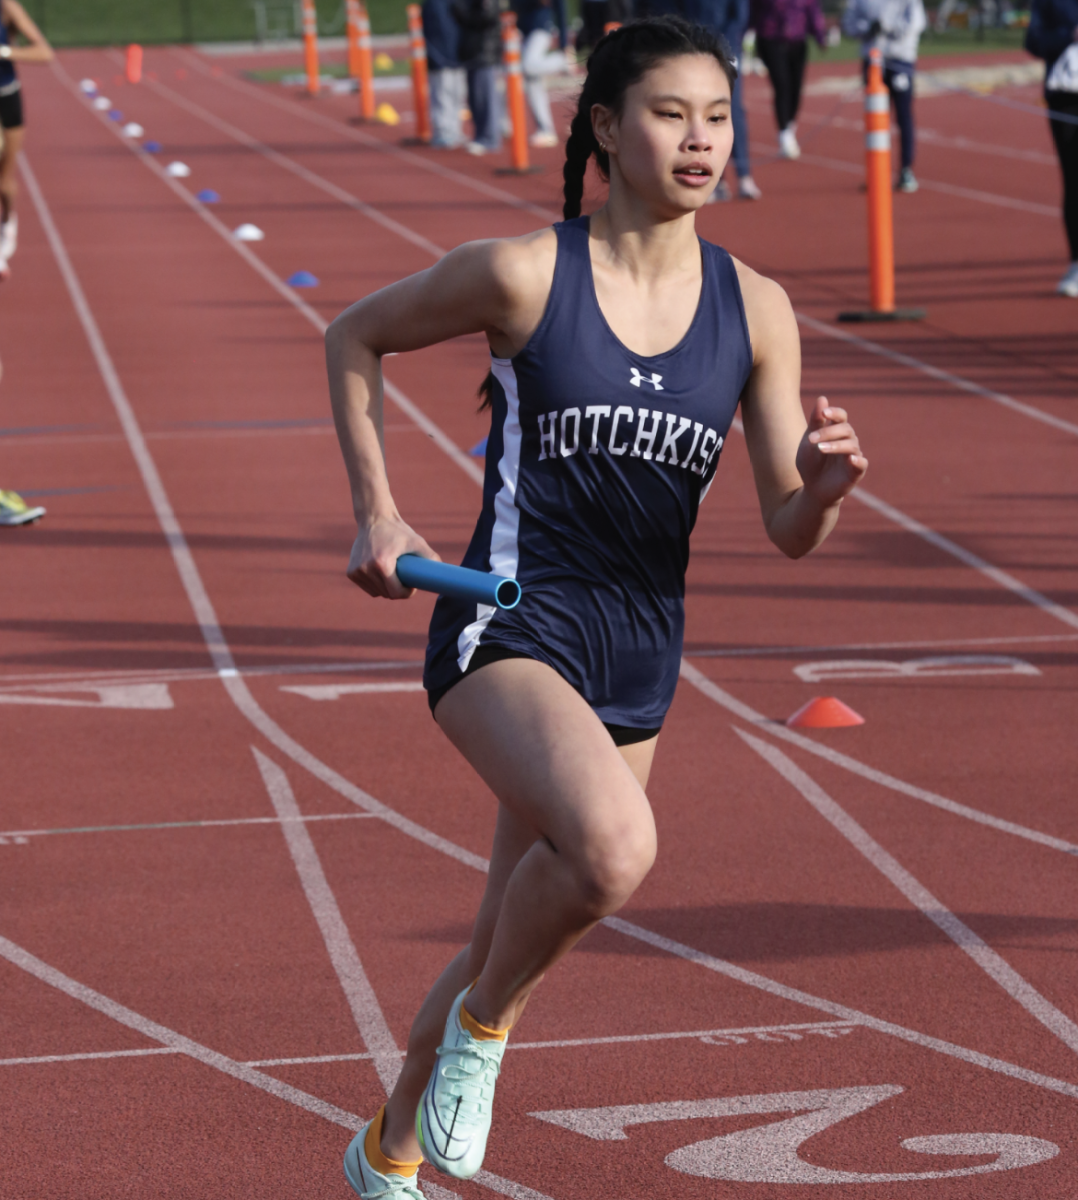 Christa+runs+in+the+4x400+Meter+relay.